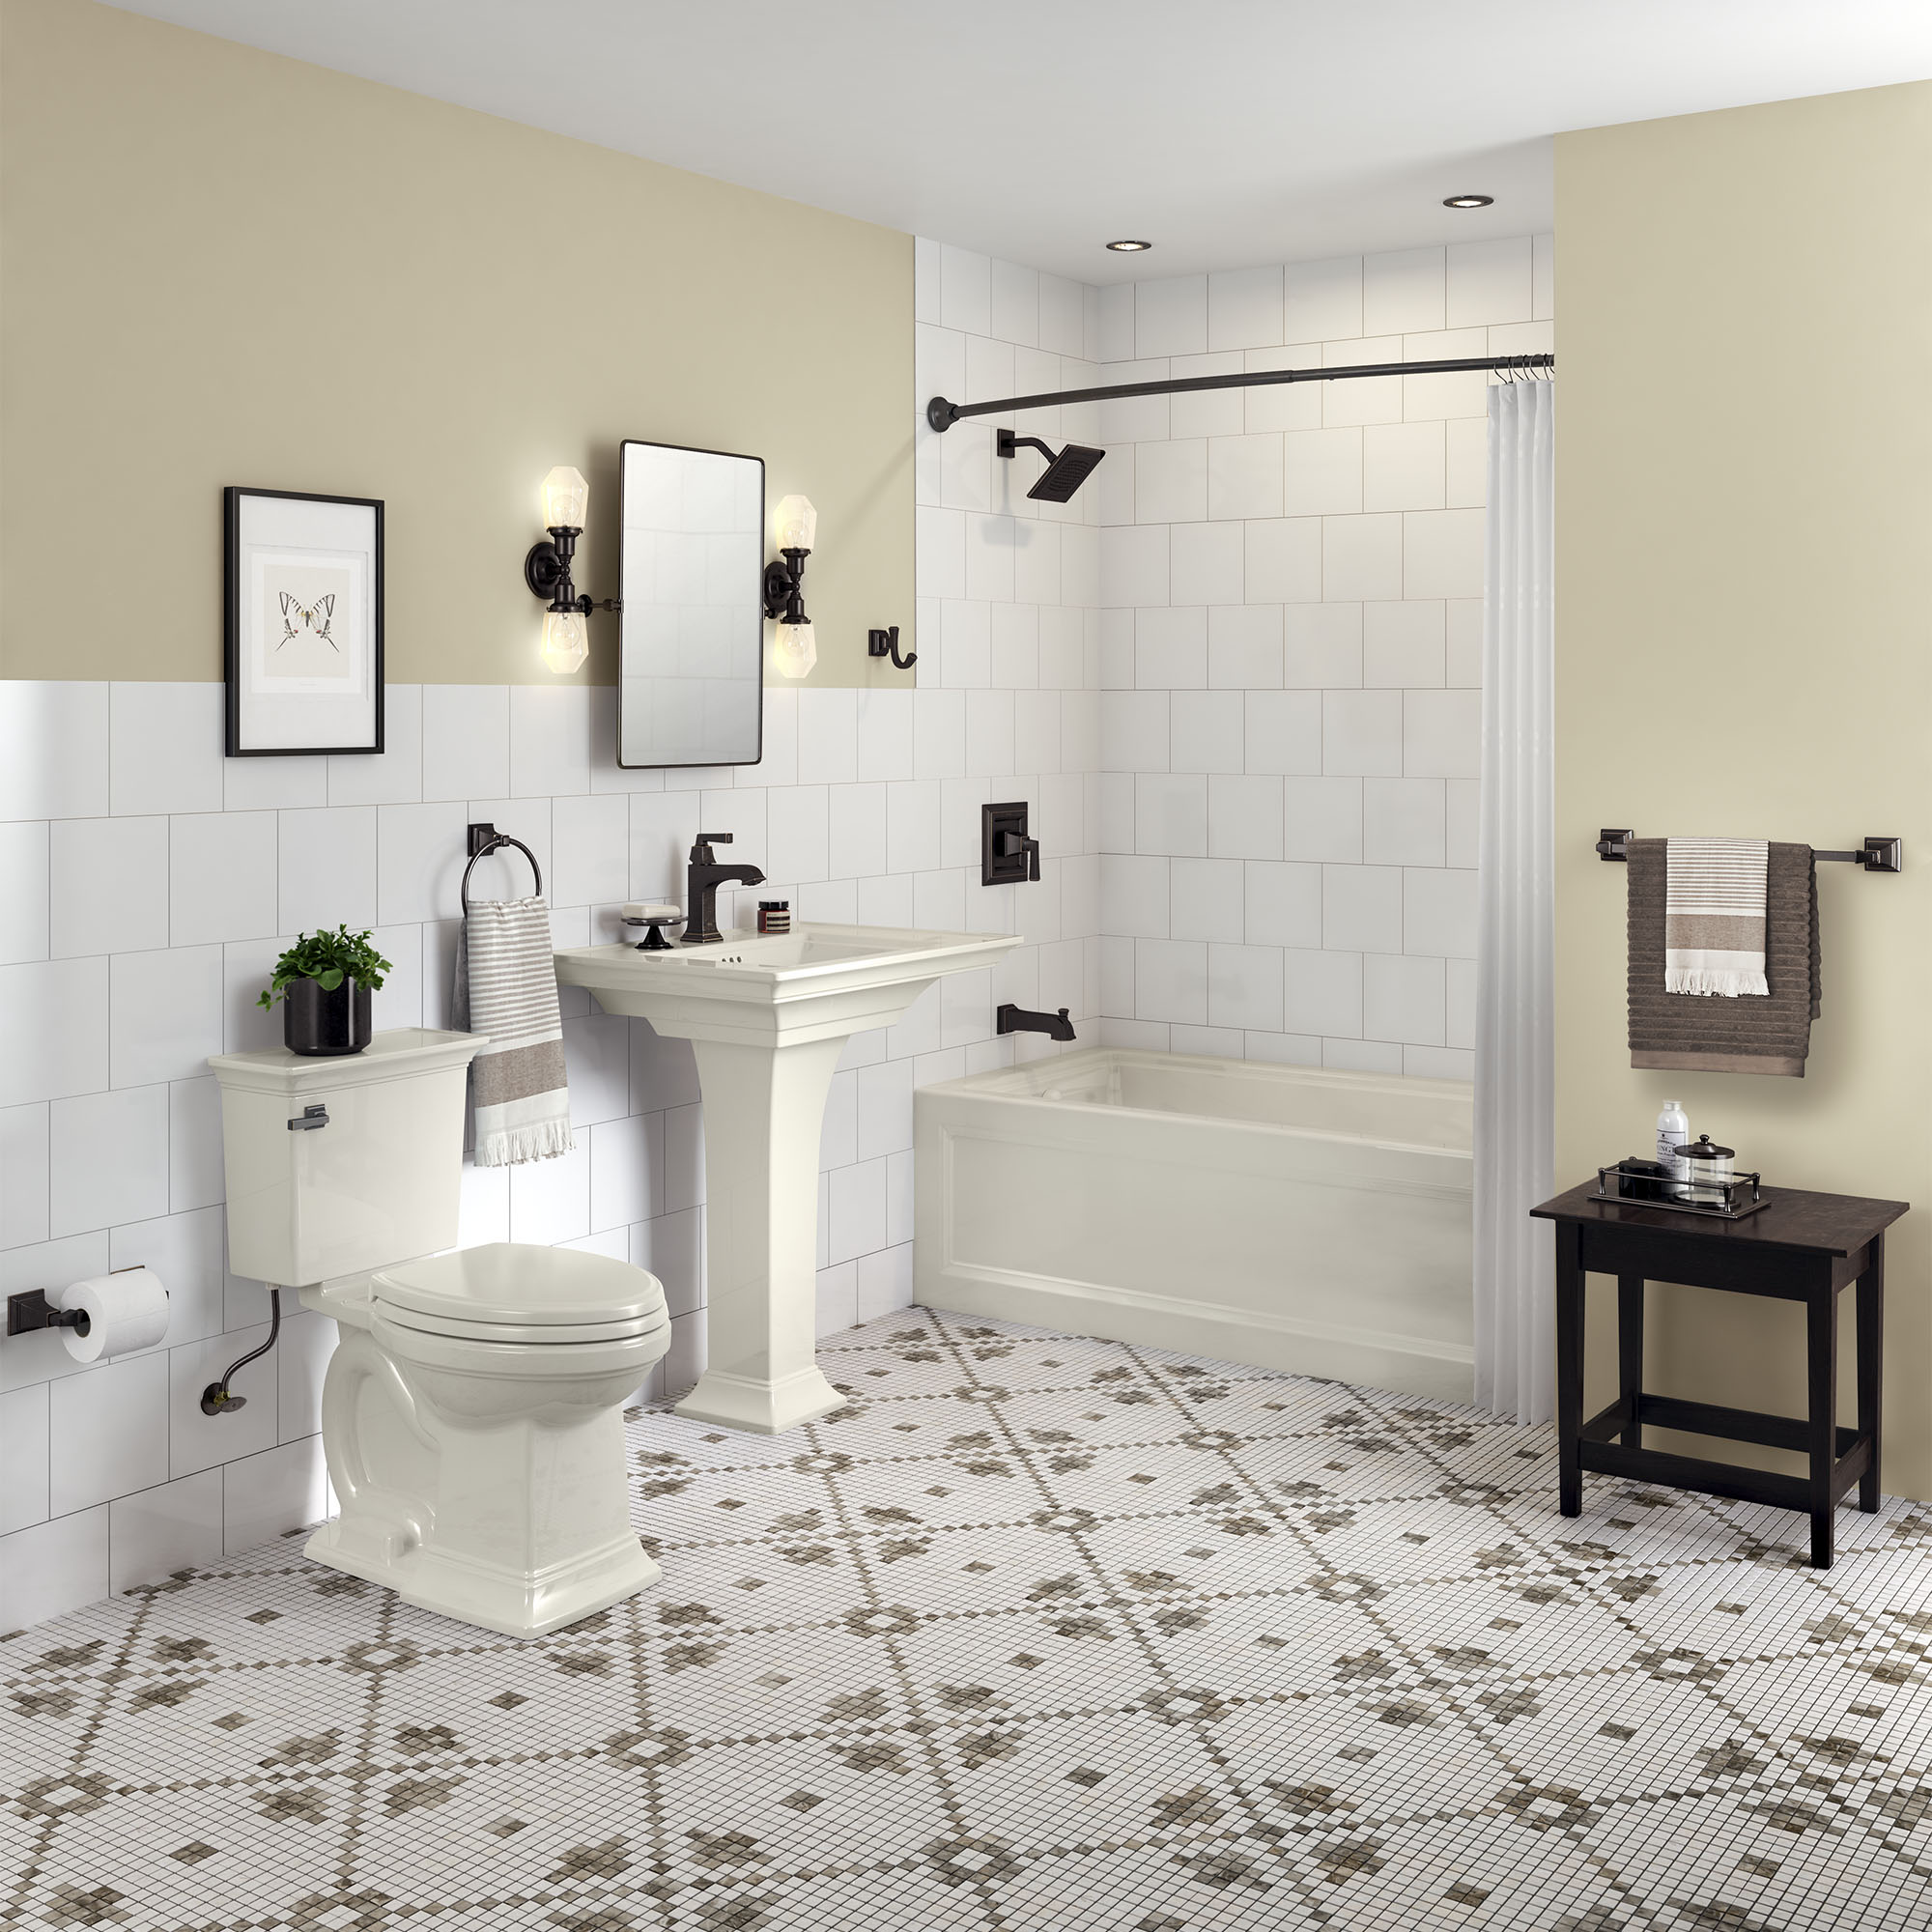 Town Square™ S Center Hole Only Pedestal Sink Top and Leg Combination